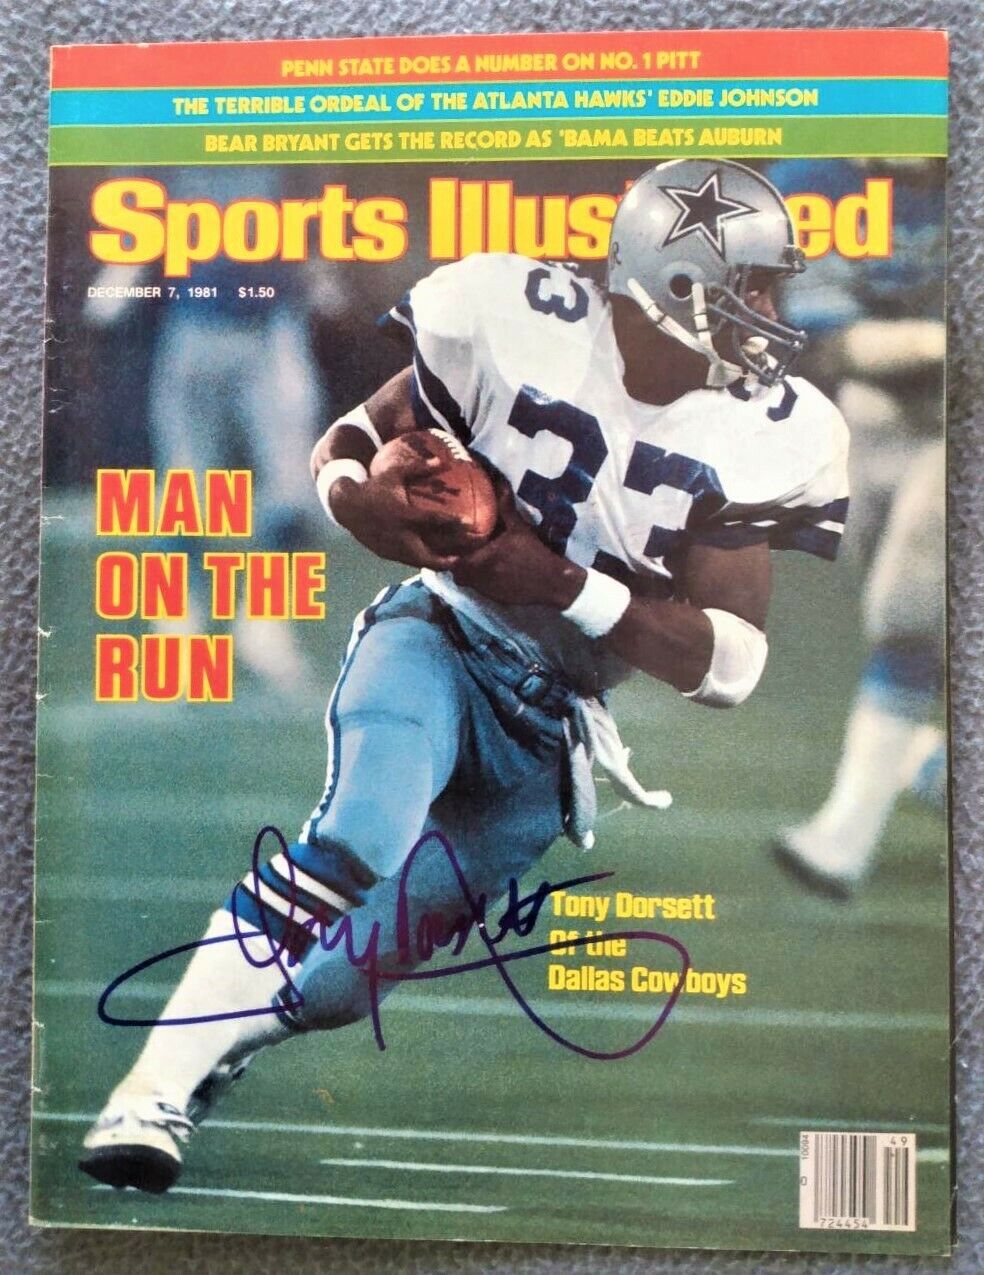 Tony Dorsett Autographed Sports Illustrated Cover ~ December 7, 1981 Issue